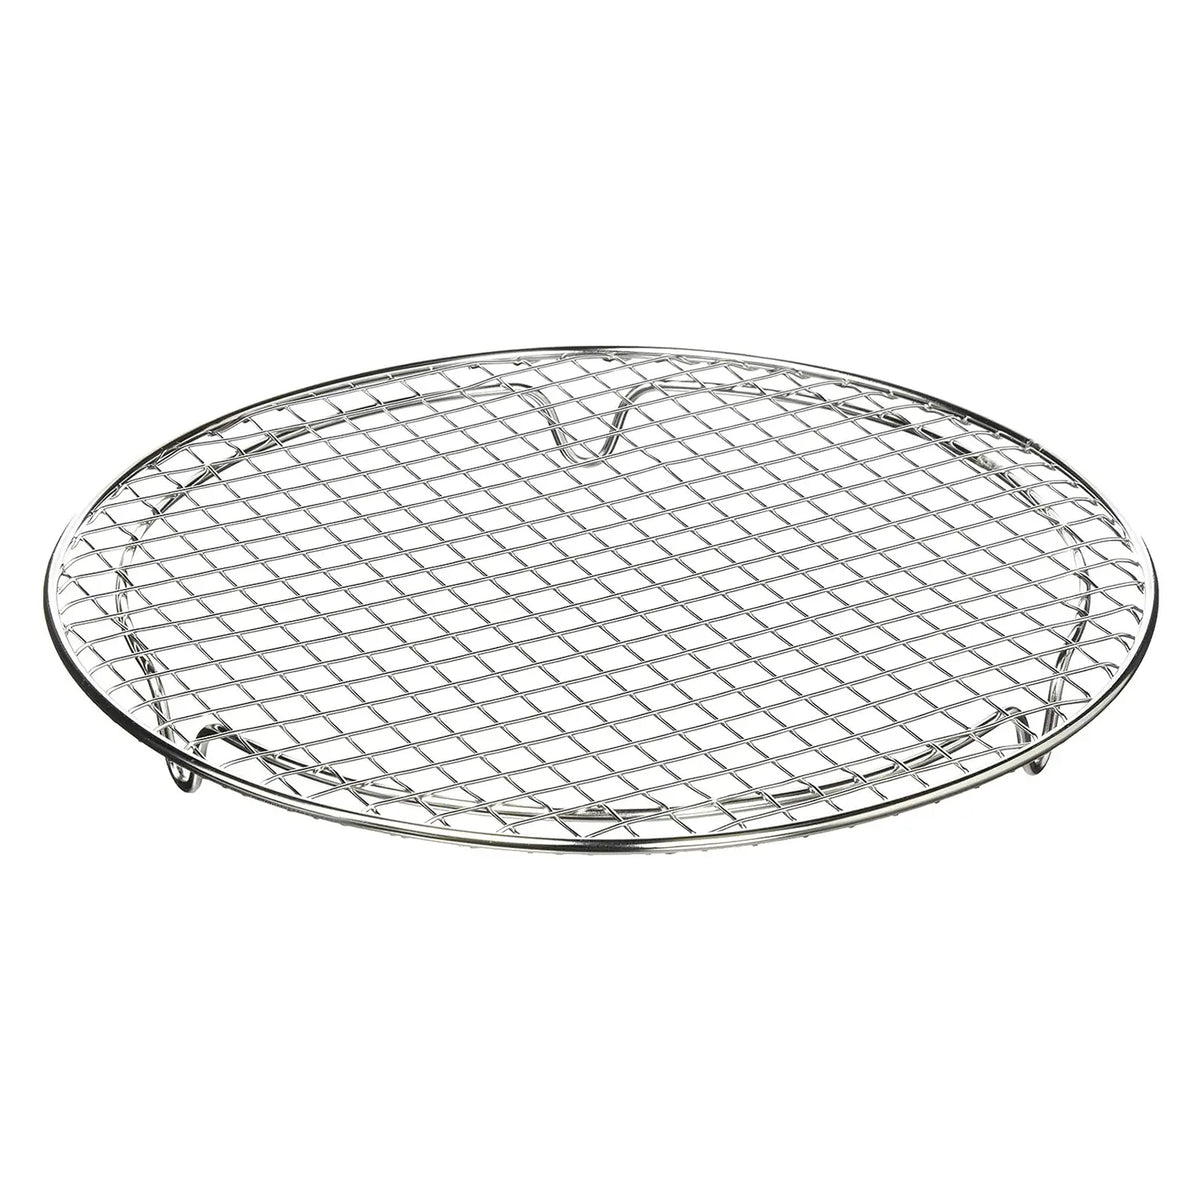 SUNCRAFT Patissiere Stainless Steel Round Cake Cooling Rack with Feet